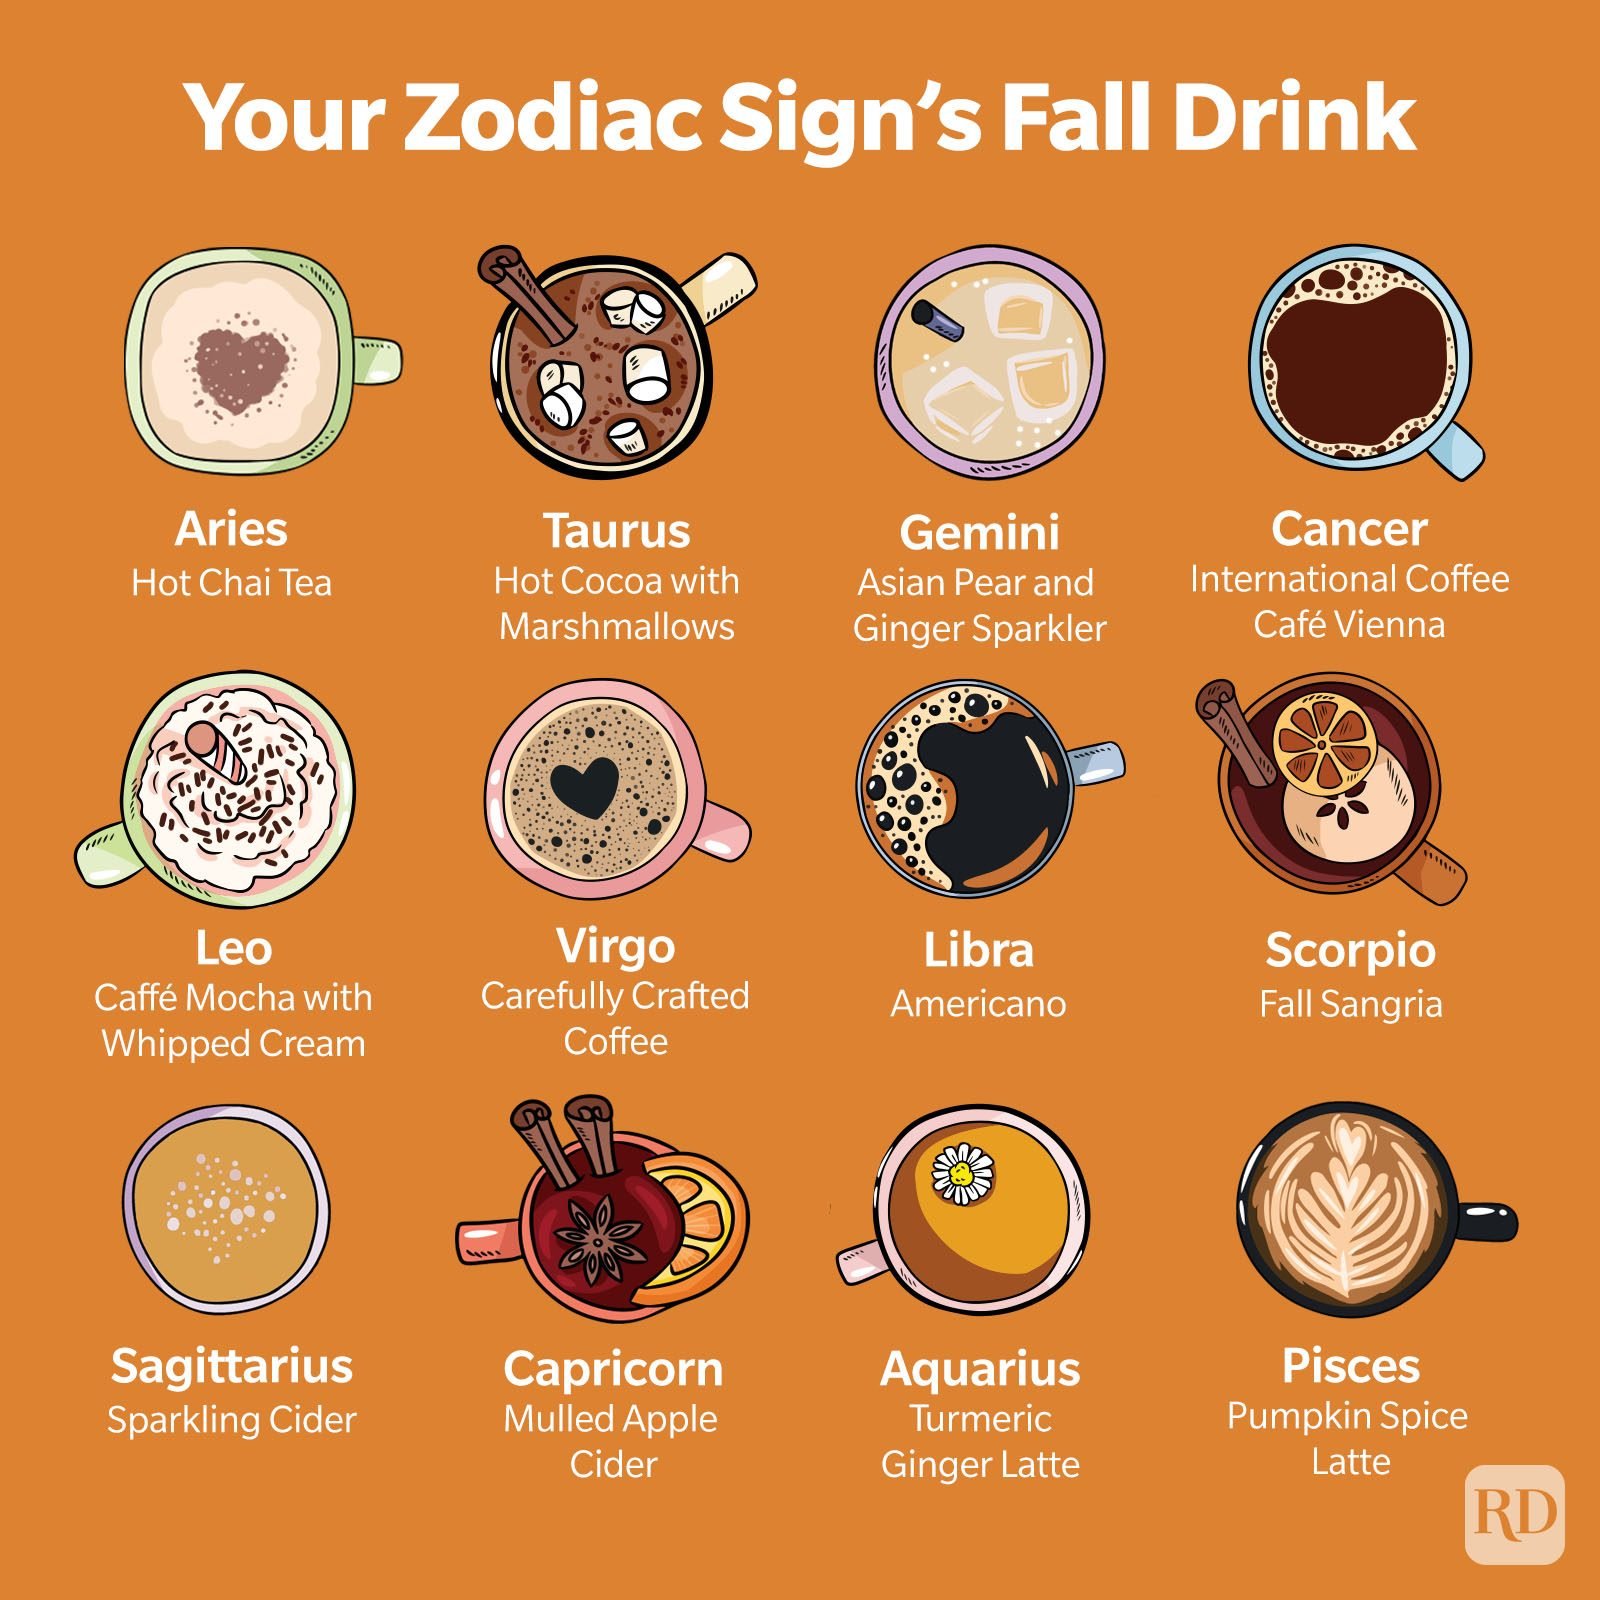 This Is Your Favorite Fall Drink Based On Your Zodiac Sign